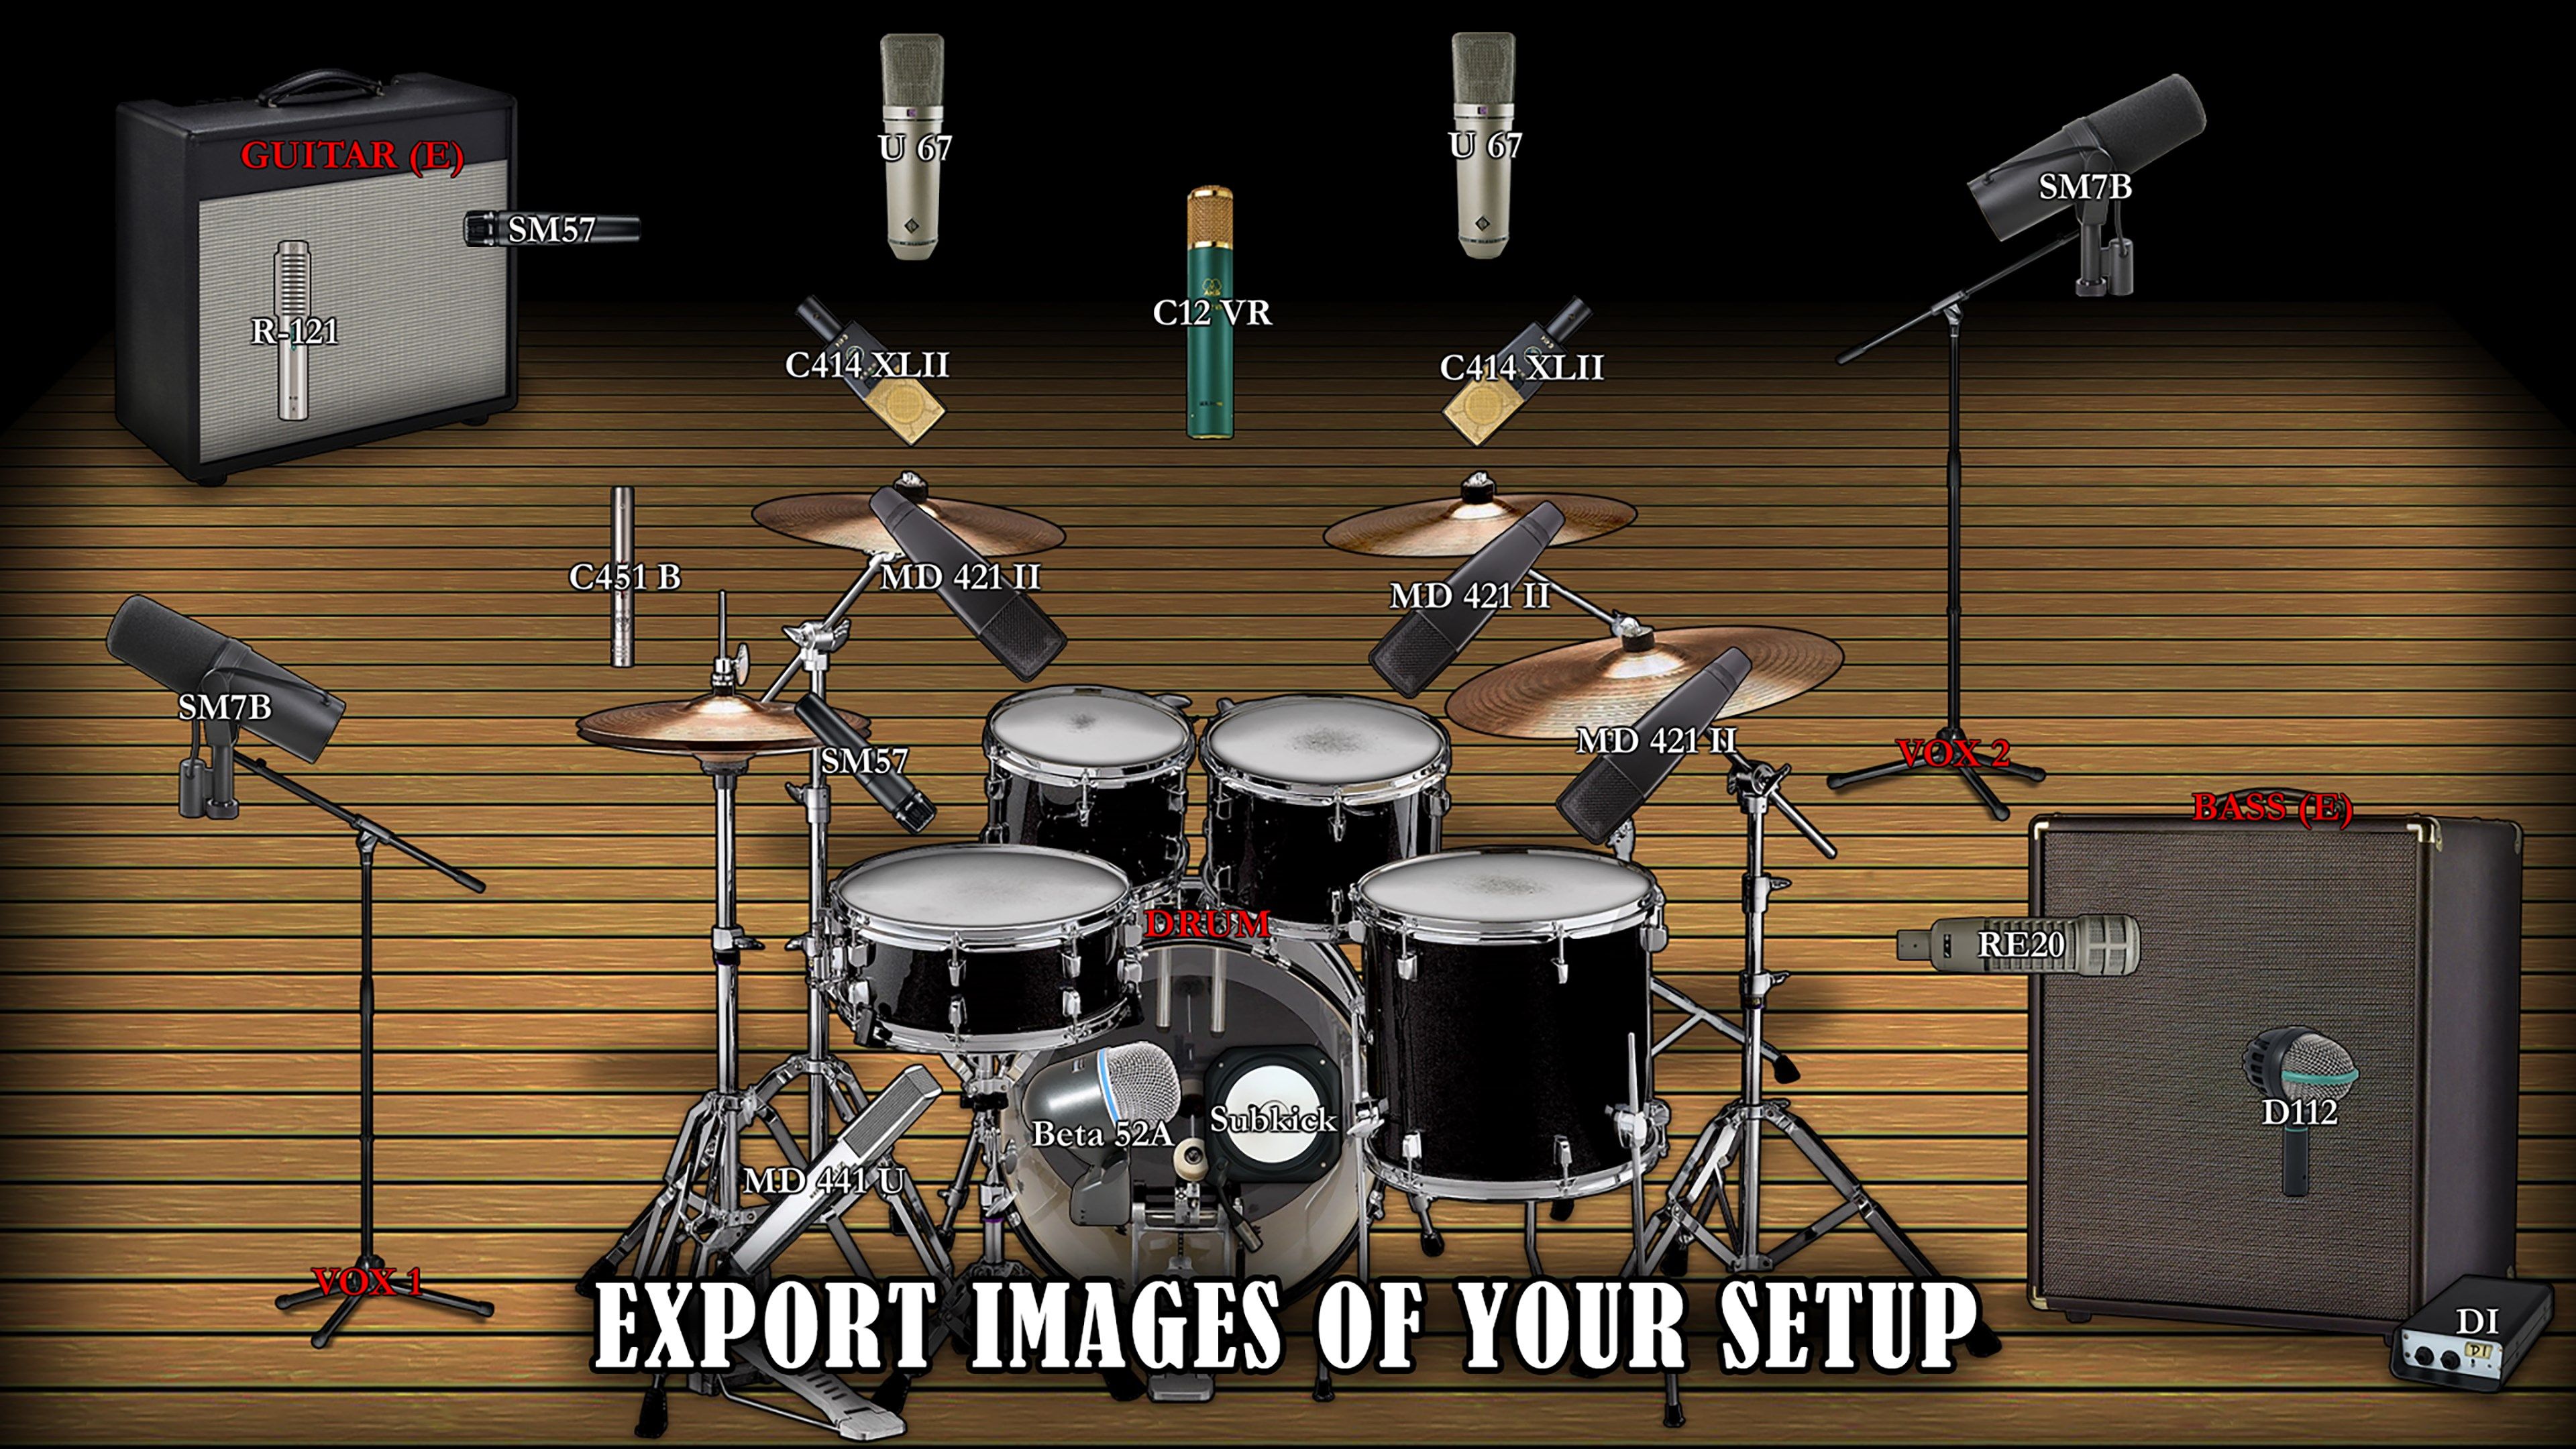 Export images of your setup